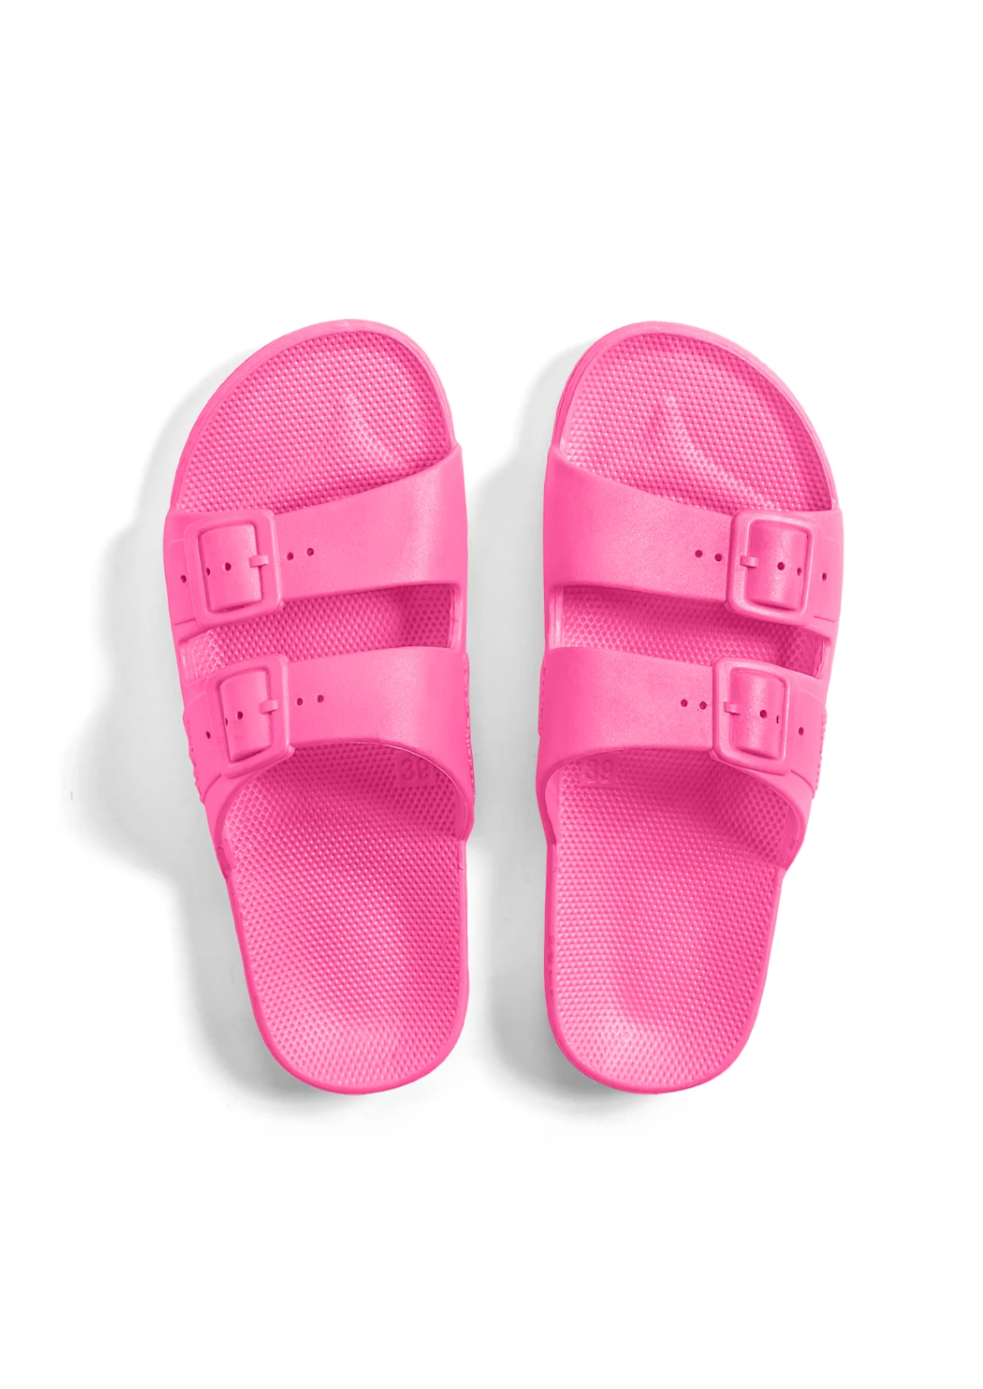 Freedom Moses 'Glow' - Pink Neon Slides We kept only the essentials, for the ultimate comfort.  Our slides are flexible, yet supportive.  Designed to feel like a hug for your feet